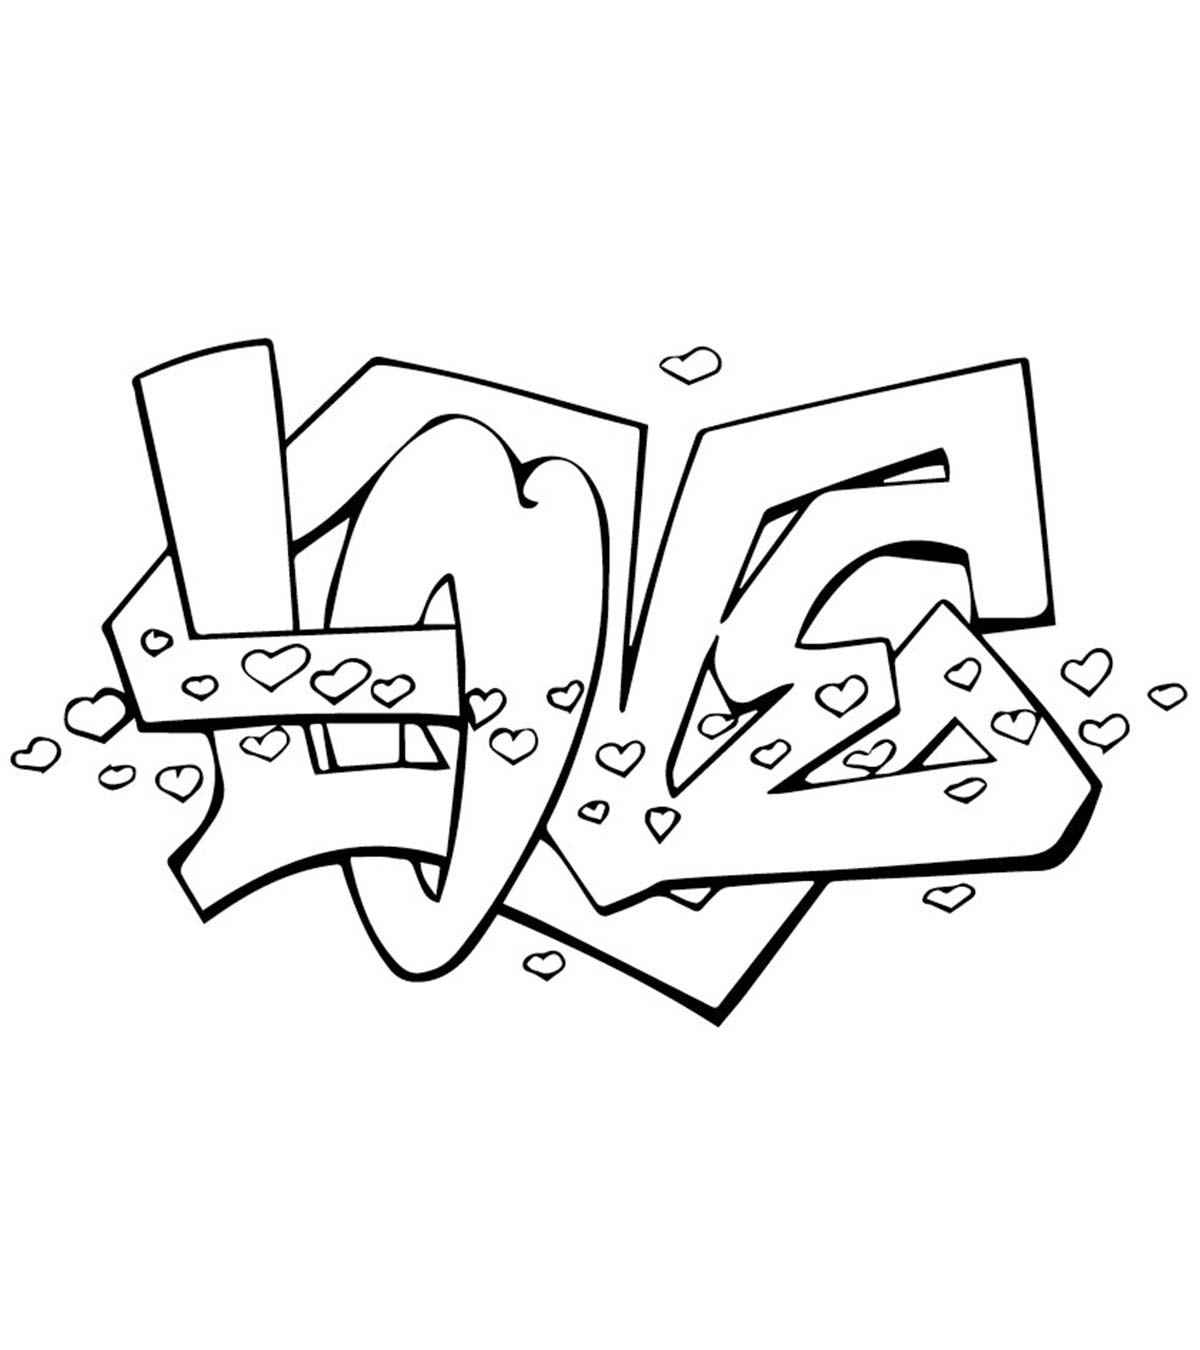 Top 10 Graffiti Coloring Pages For Your Little Ones_image